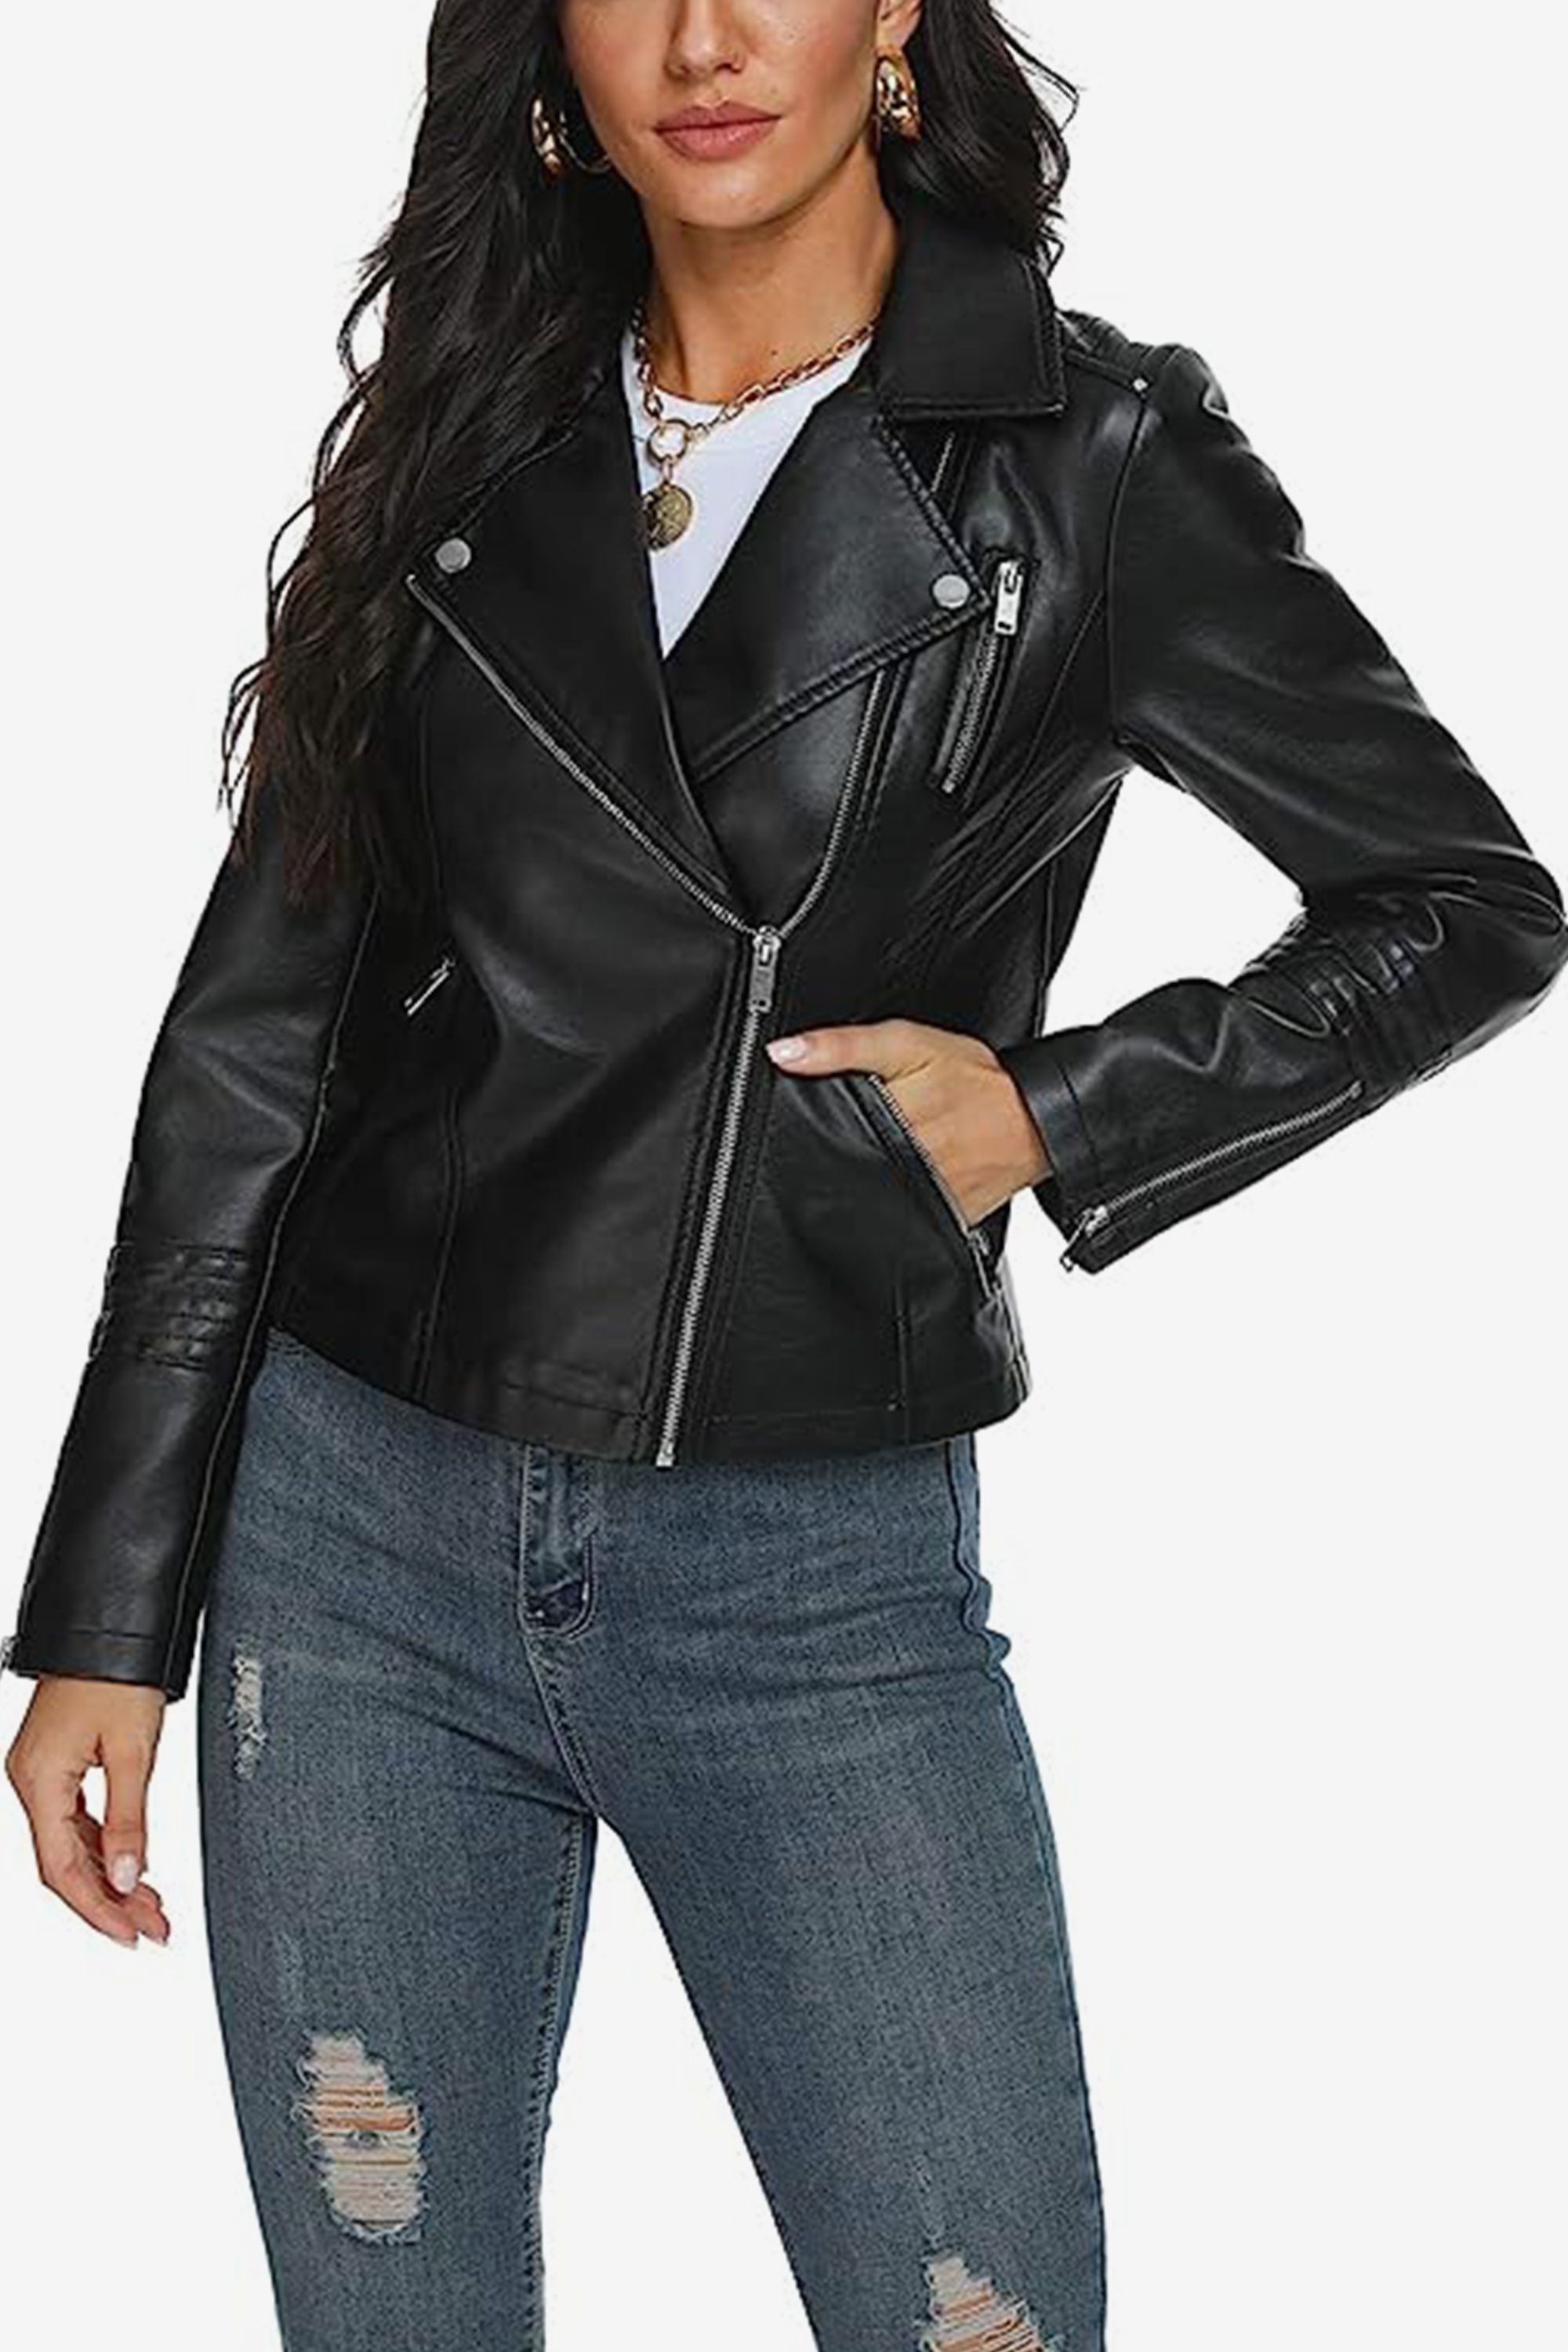 Best Leather Jackets for Women in , According to Stylist